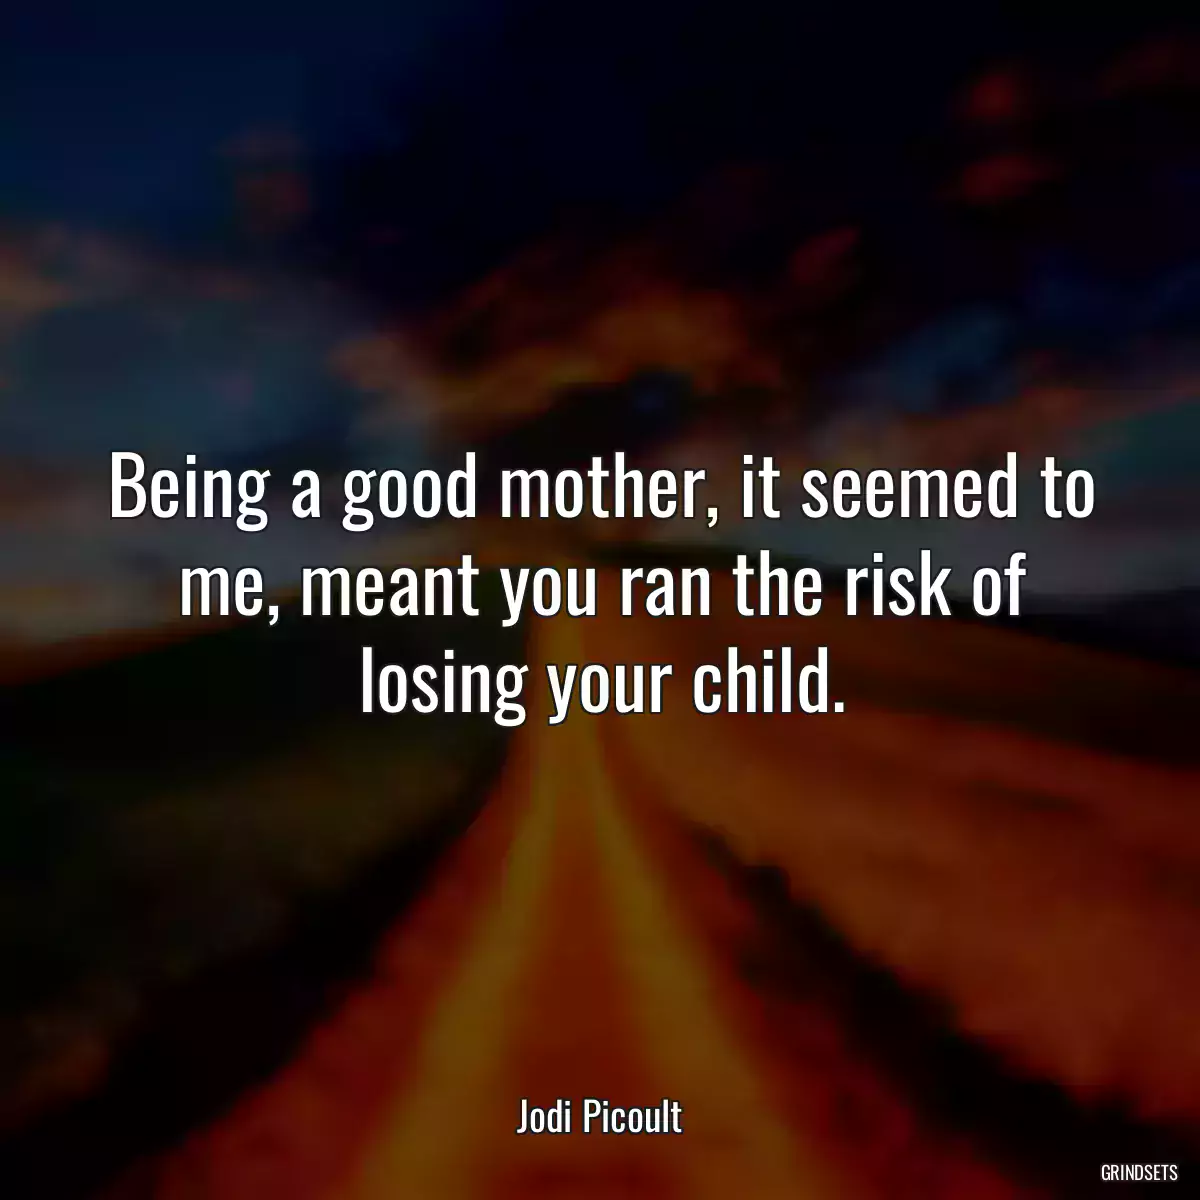 Being a good mother, it seemed to me, meant you ran the risk of losing your child.